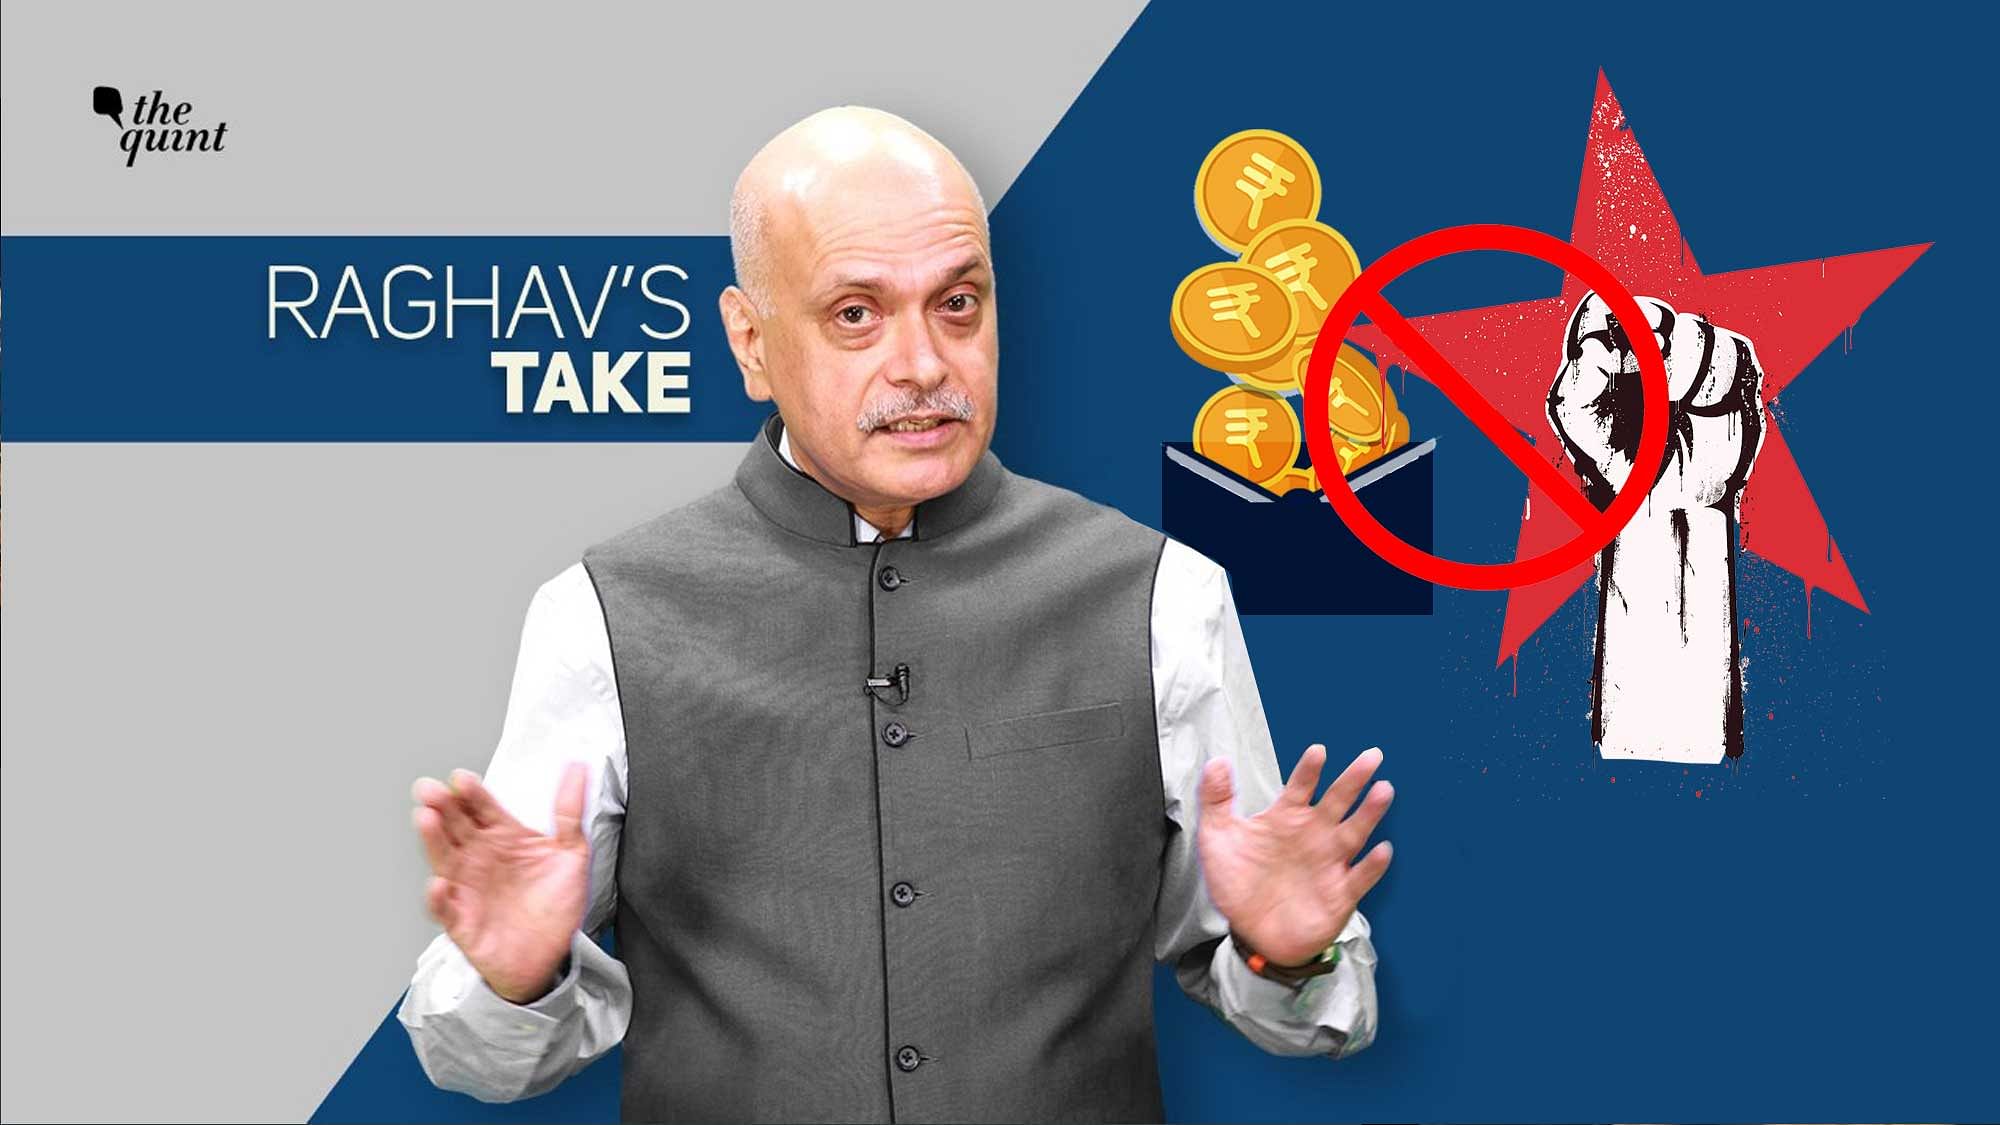 Image of The Quint’s Founder-Editor, Raghav Bahl, used for representational purposes.